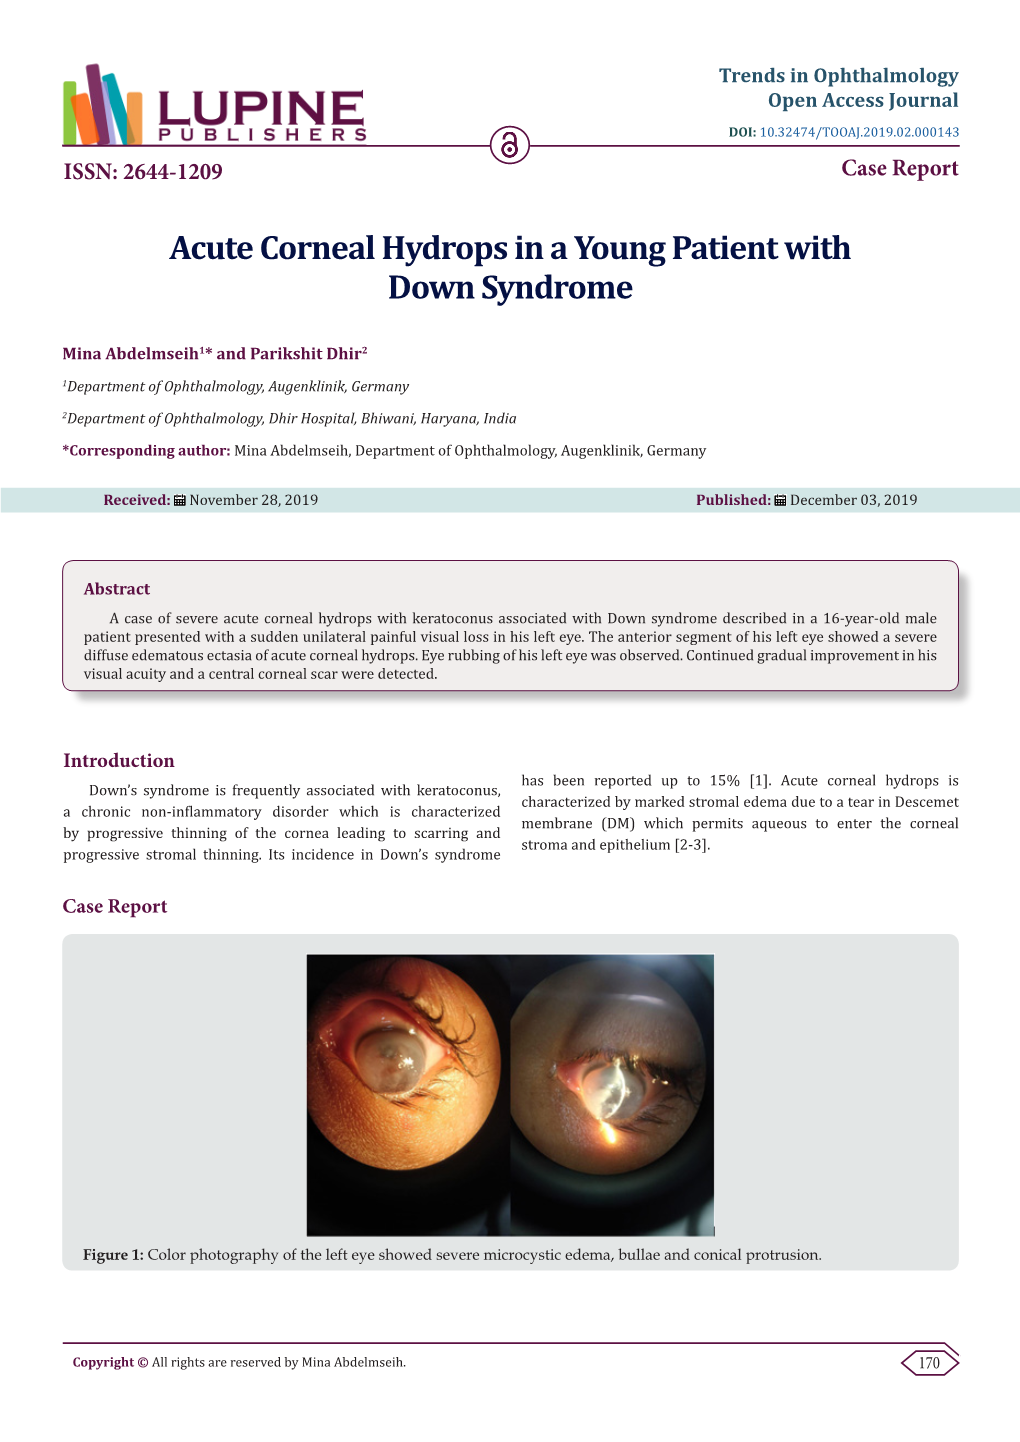 Acute Corneal Hydrops in a Young Patient with Down Syndrome